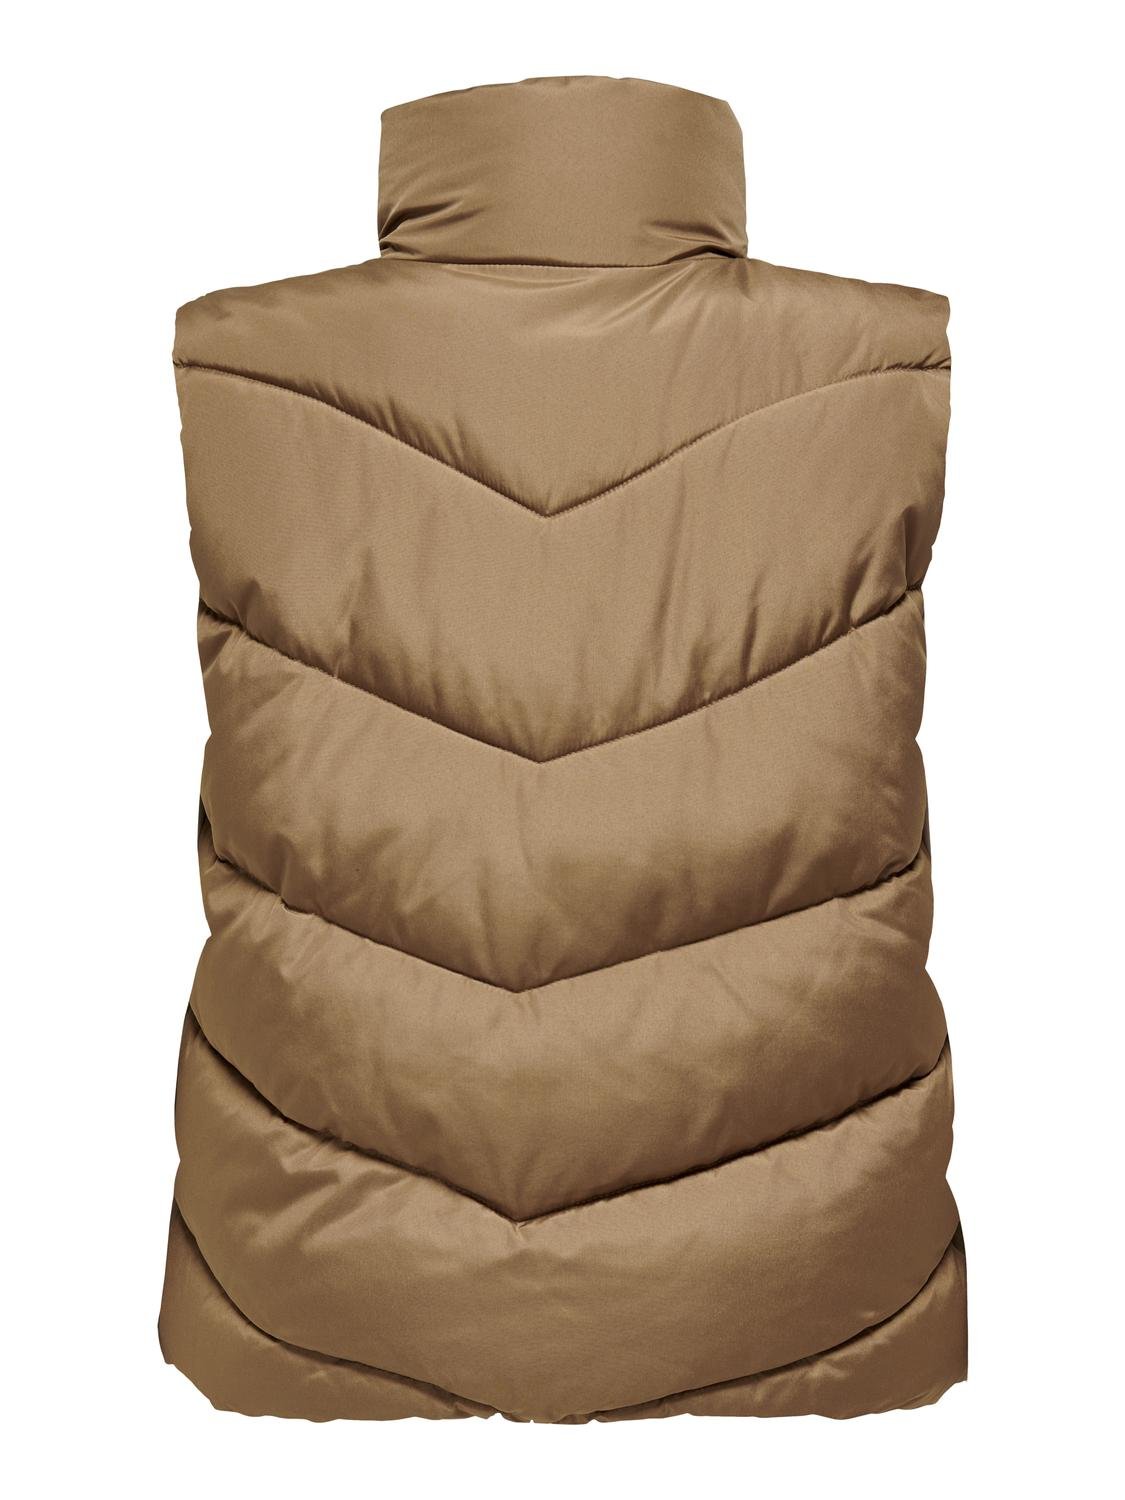 ONLY Gilets anti-froid Col haut -Toasted Coconut - 15310770